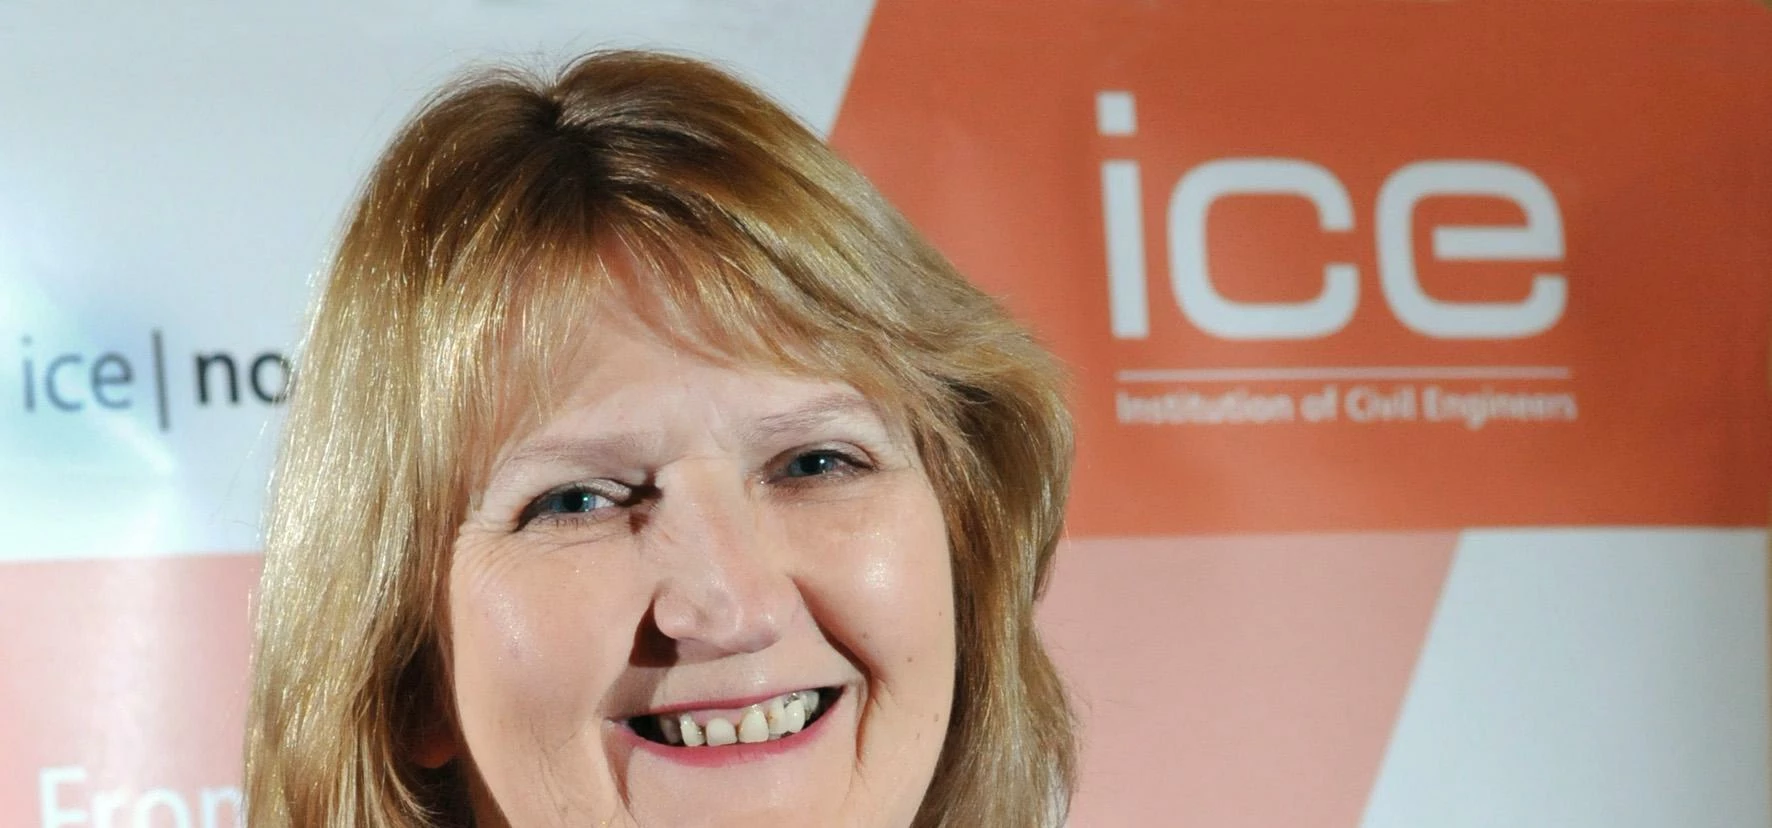 Penny Marshall, Director of ICE Yorkshire and Humber